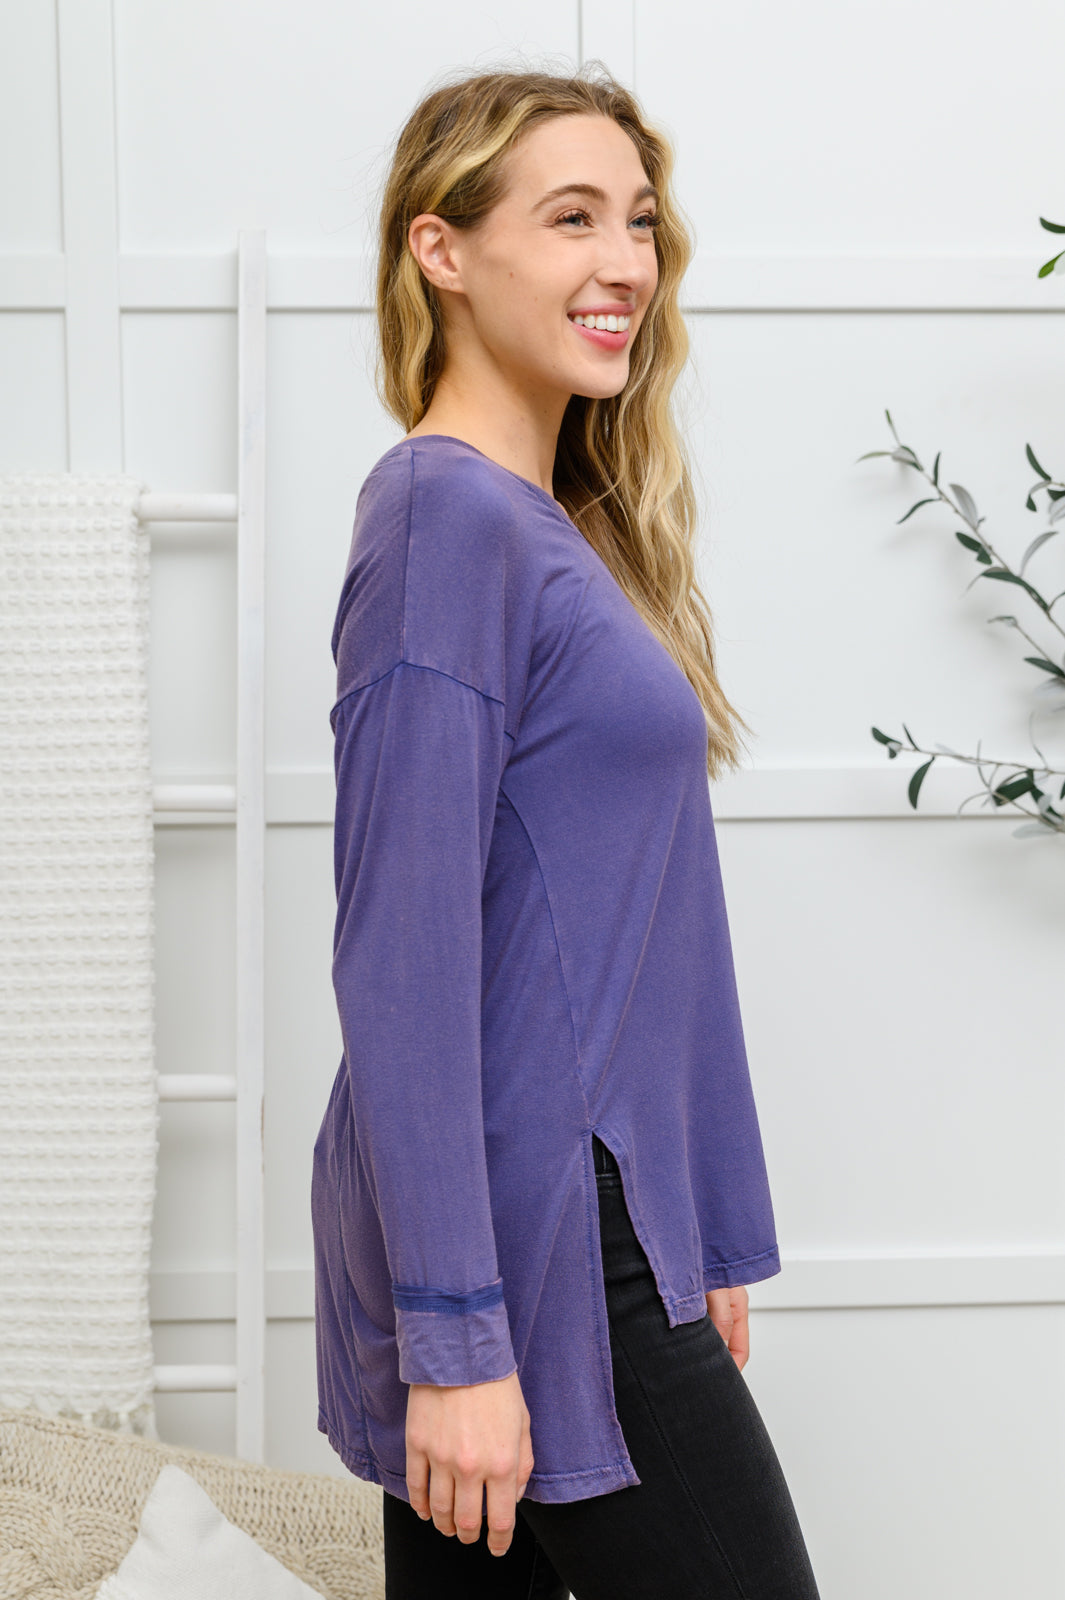 Long Sleeve Knit Top With Pocket In Denim Blue-Long Sleeve Tops-Krush Kandy, Women's Online Fashion Boutique Located in Phoenix, Arizona (Scottsdale Area)